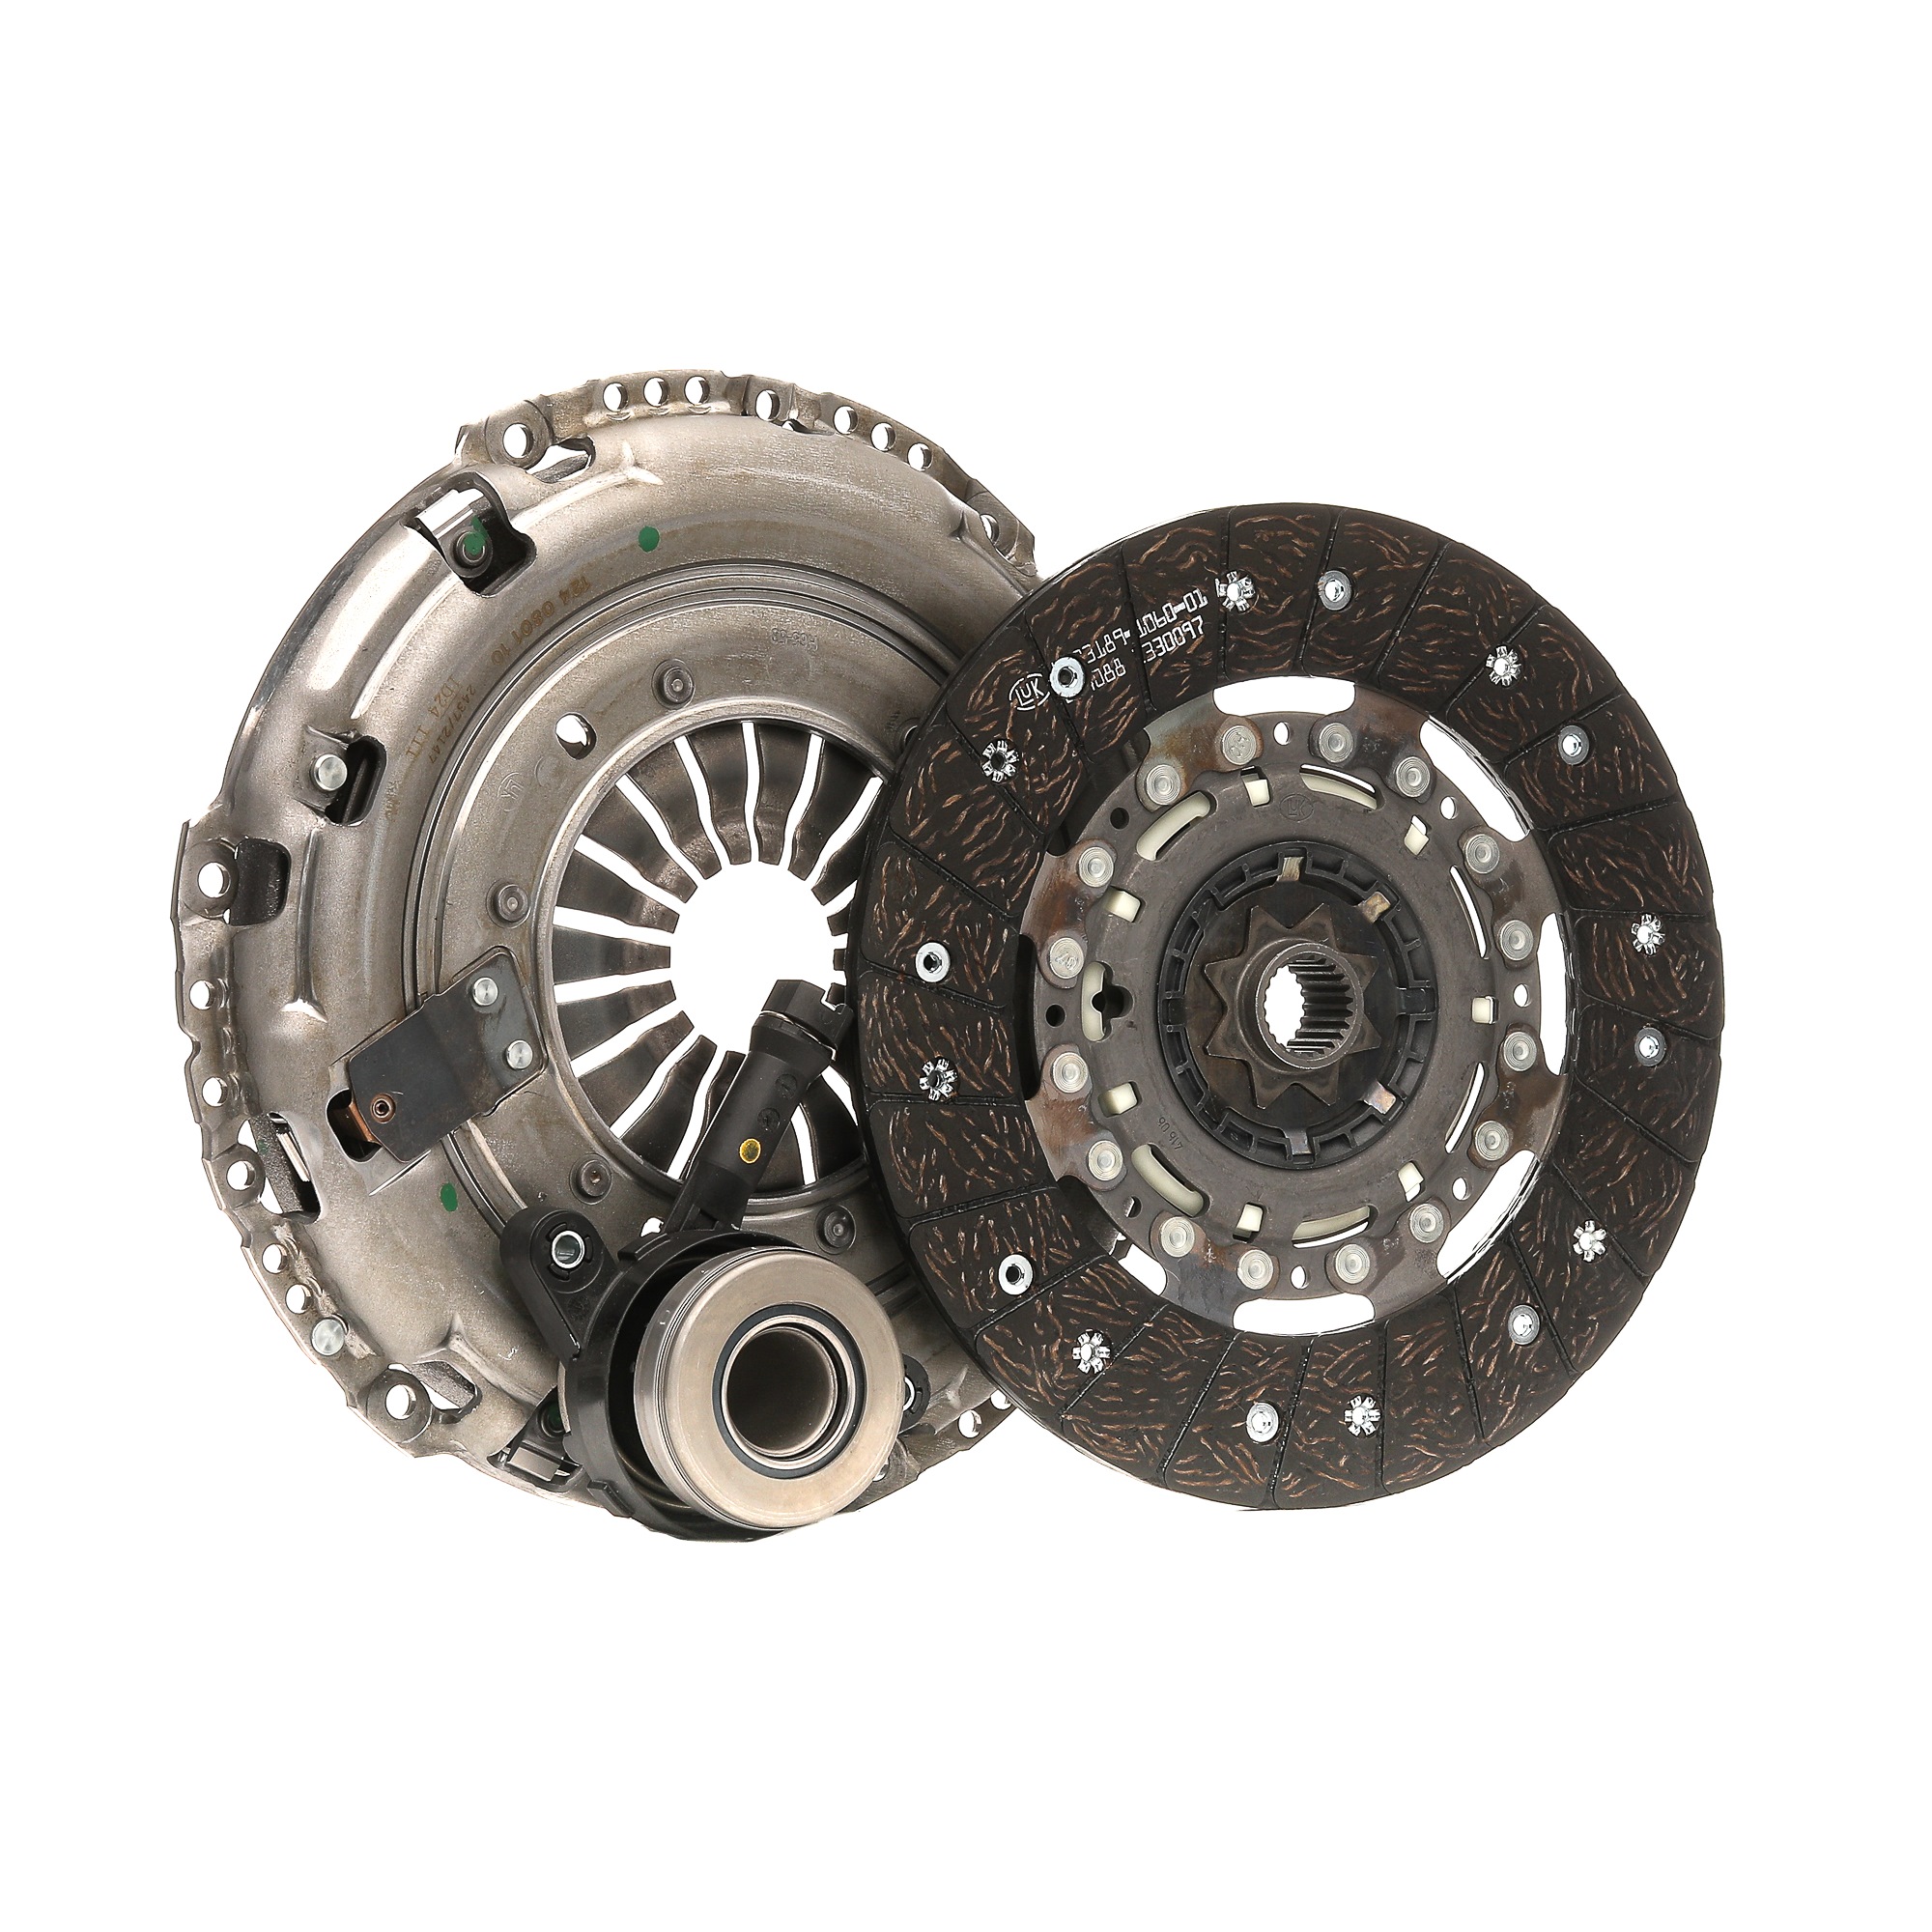 LuK 624 3976 33 Clutch kit DODGE experience and price